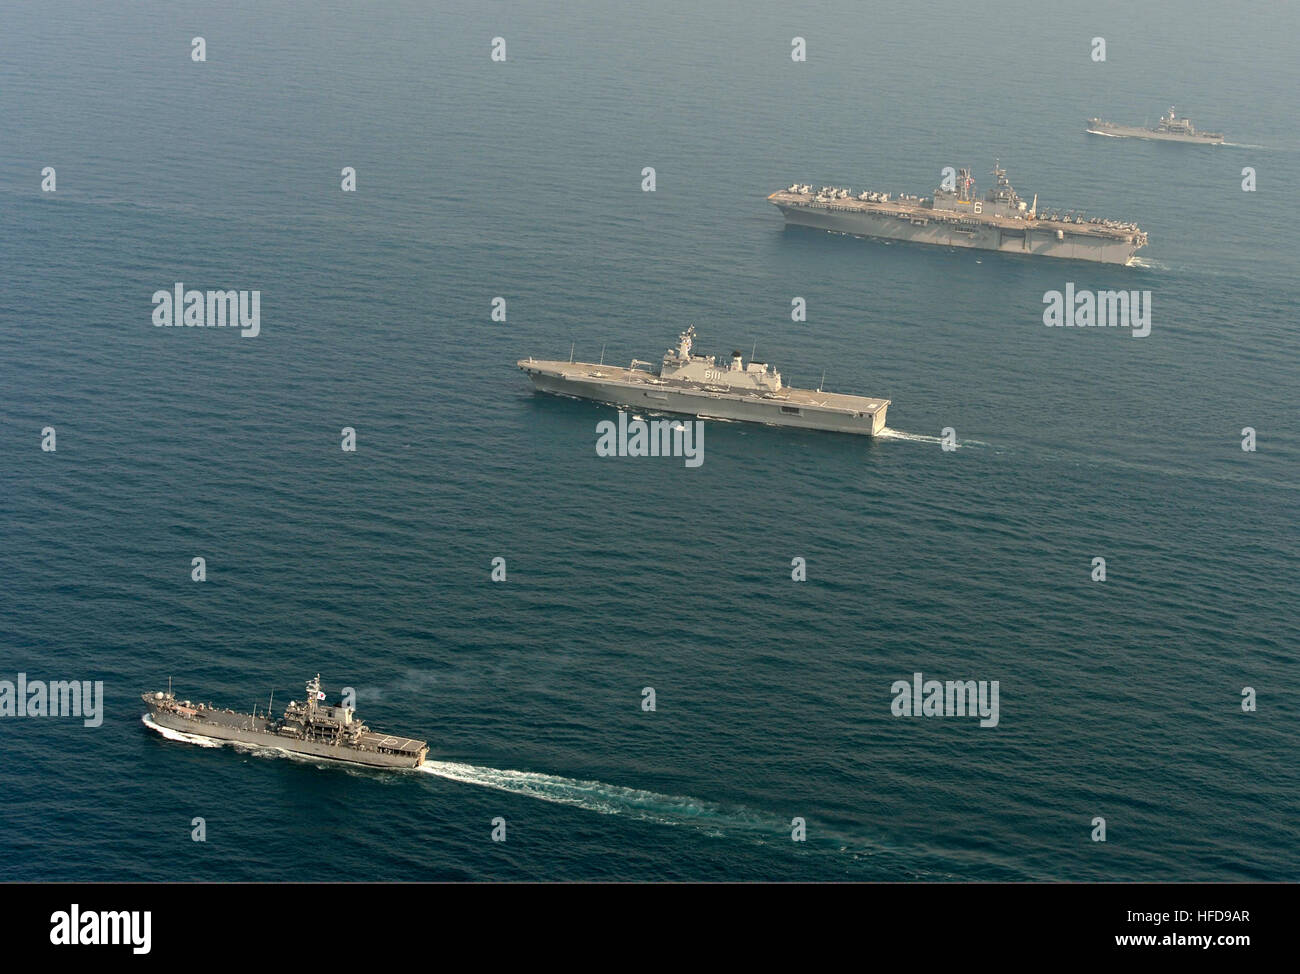 The amphibious assault ship USS Bonhomme Richard (LHD 6), second from top right, transits the East China Sea with Republic of Korea Navy ships during a photo exercise March 27, 2014. The Bonhomme Richard was the flagship of the Bonhomme Richard Amphibious Ready Group and was participating in exercise Ssang Yong 14, a combined U.S.-South Korean combat readiness and joint/combined interoperability exercise designed to advance South Korean command and control capabilities through amphibious operations. (U.S. Navy photo by Mass Communication Specialist 2nd Class Michael Achterling/Released) The am Stock Photo